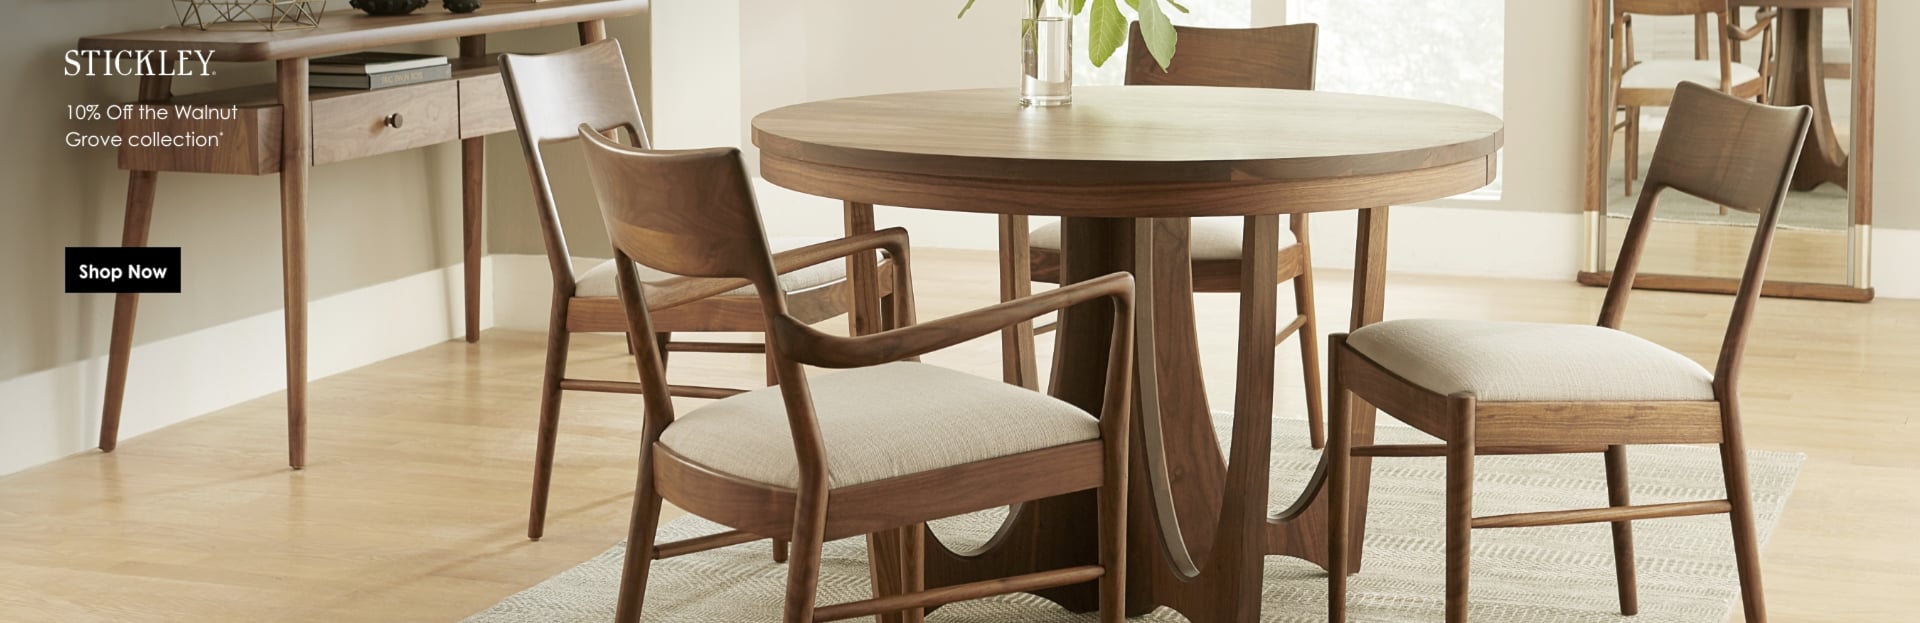 10% off Walnut Grove by Stickley. See store for details.